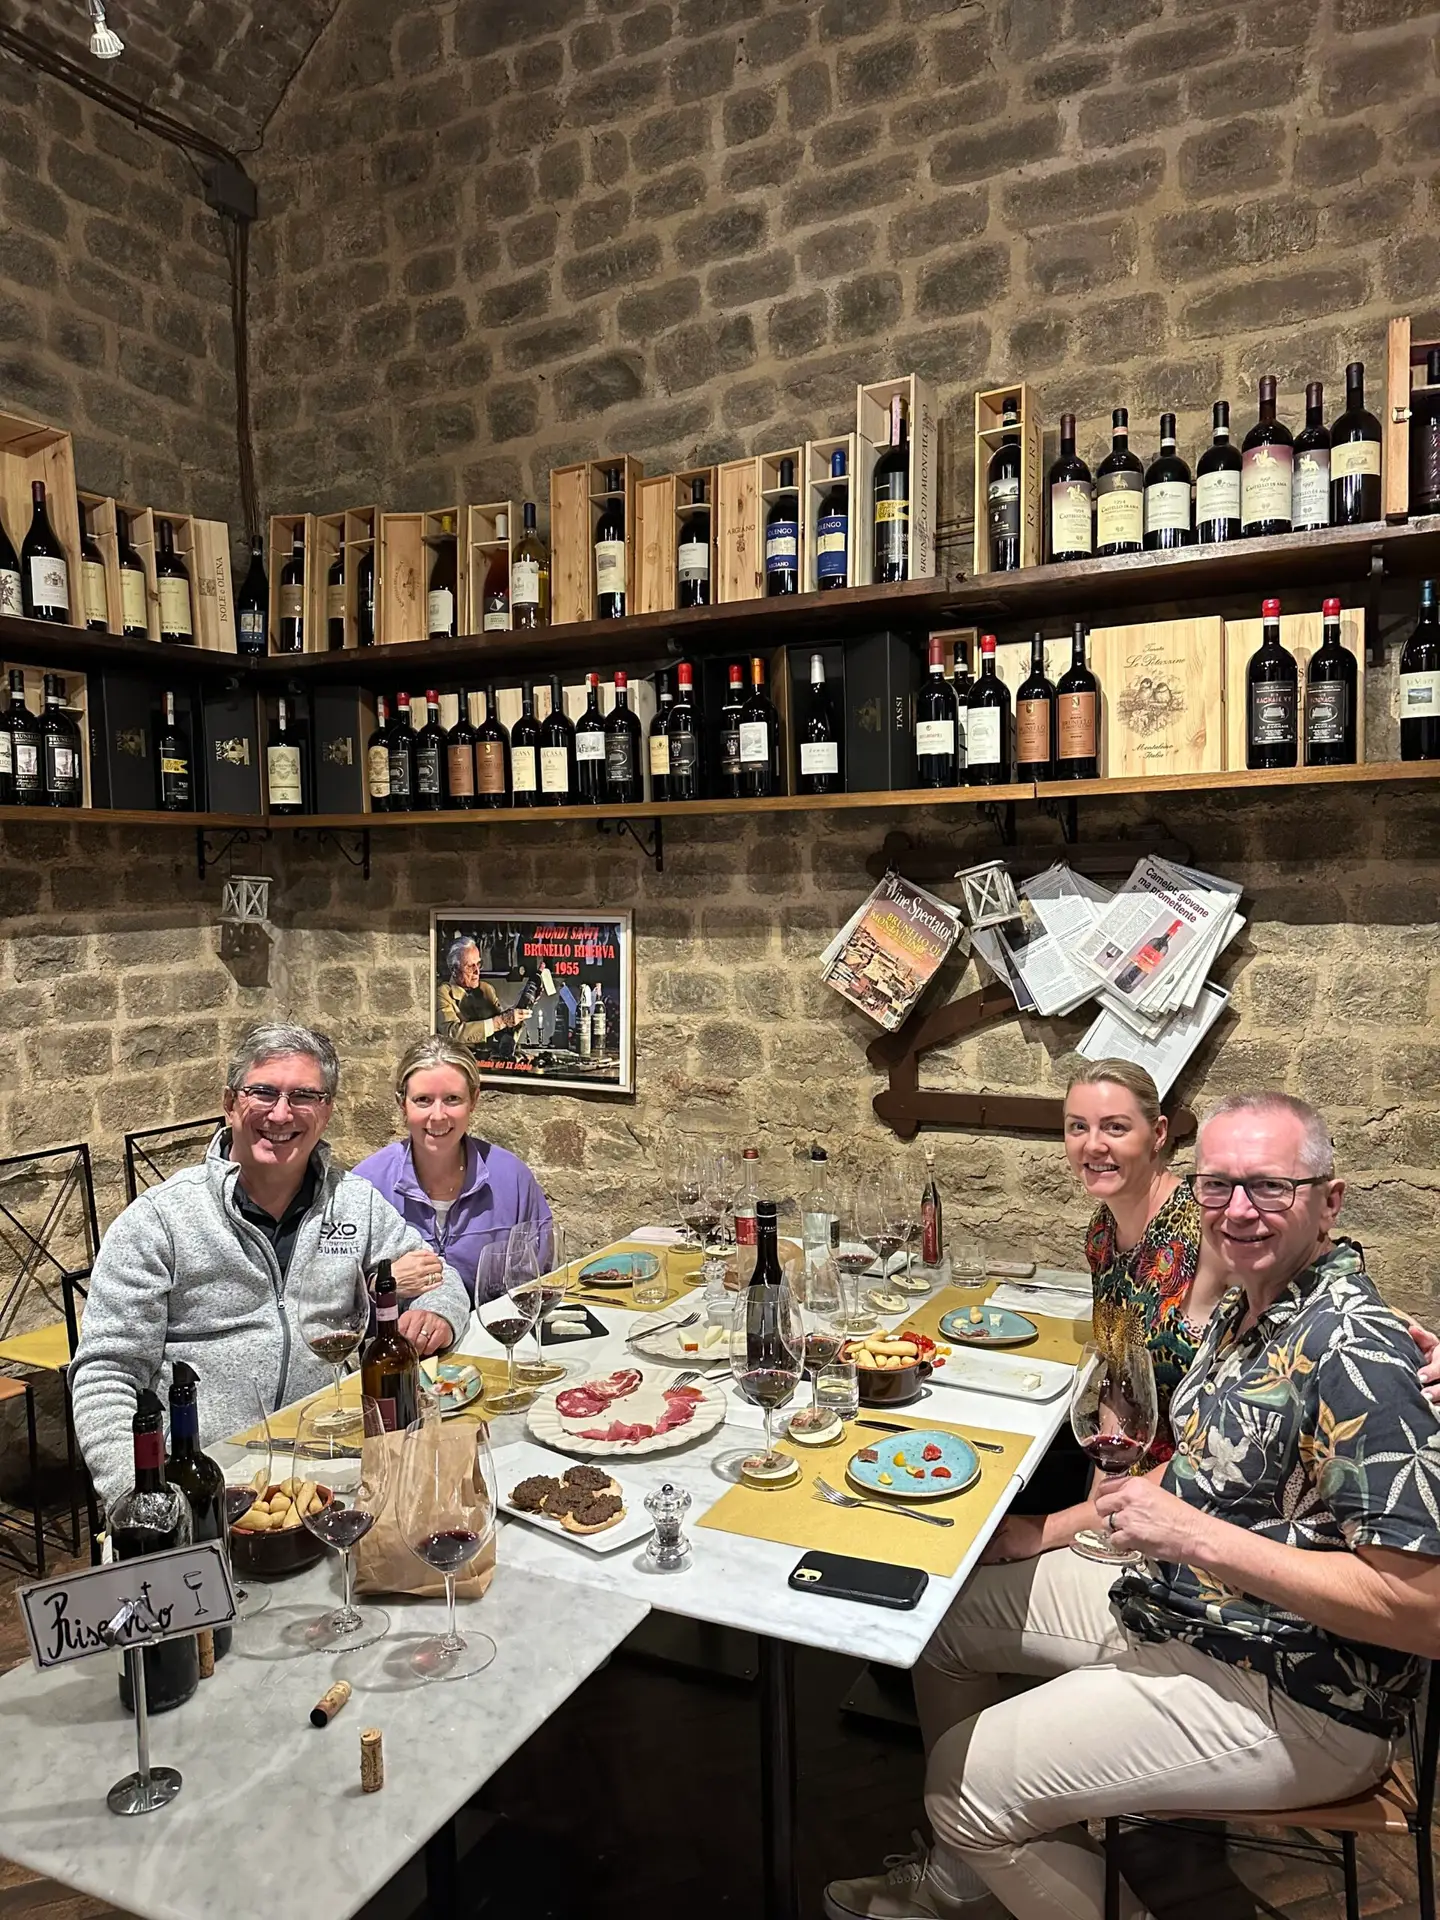 Brian and Carrie Pasch hosted guests from Australia at the Fortezza for a wine tasting and lunch